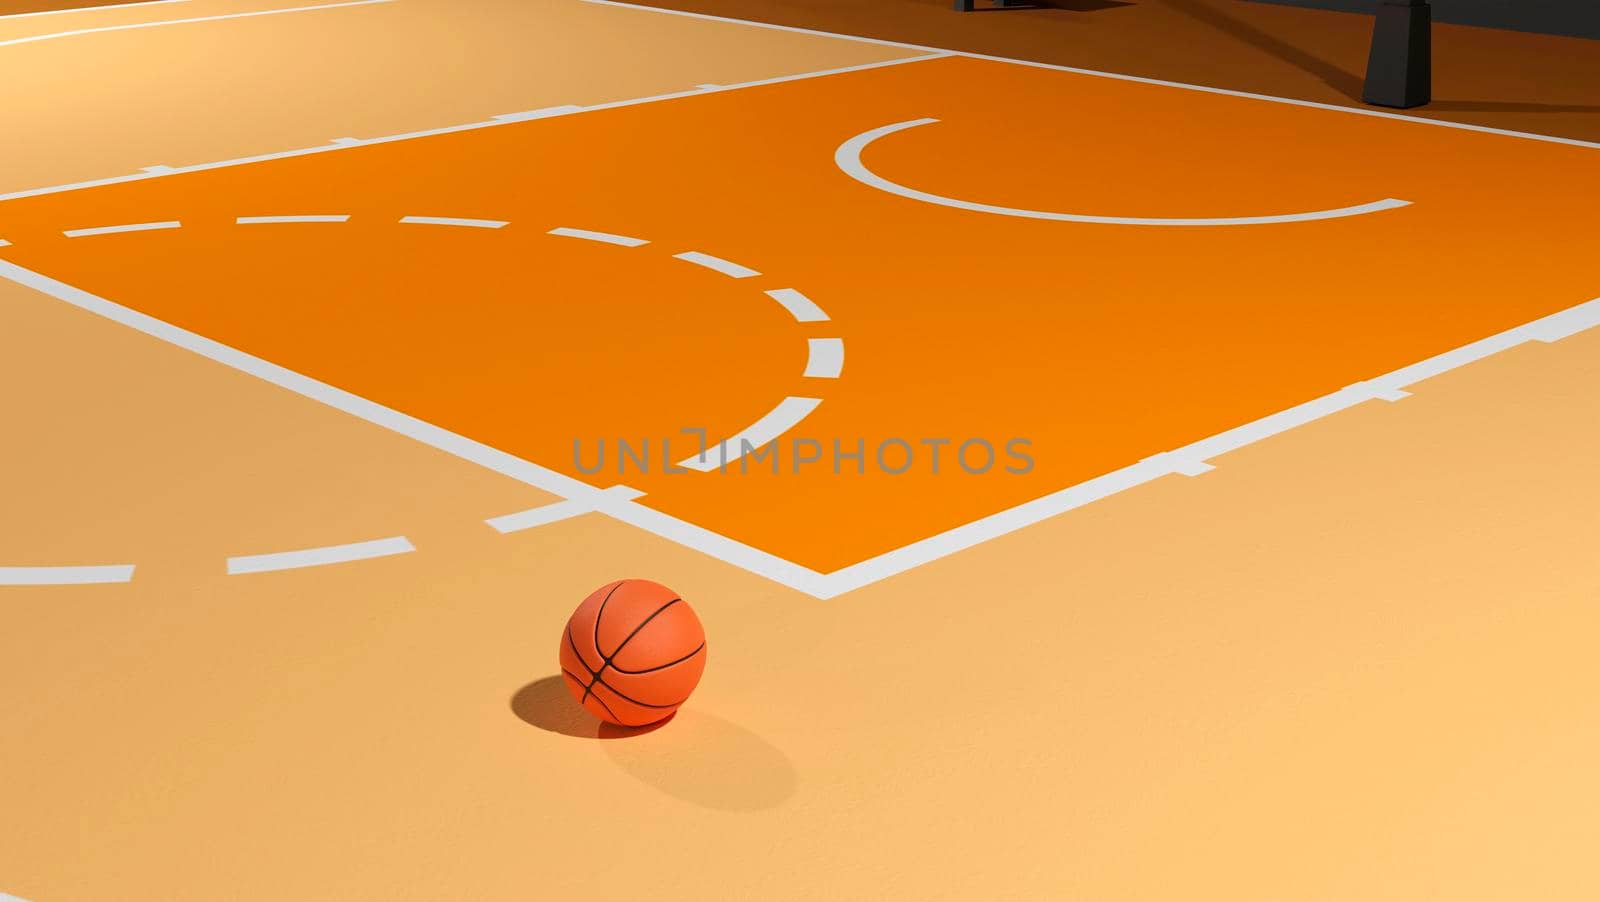 3d rendering of a basketball on a court by raferto1973